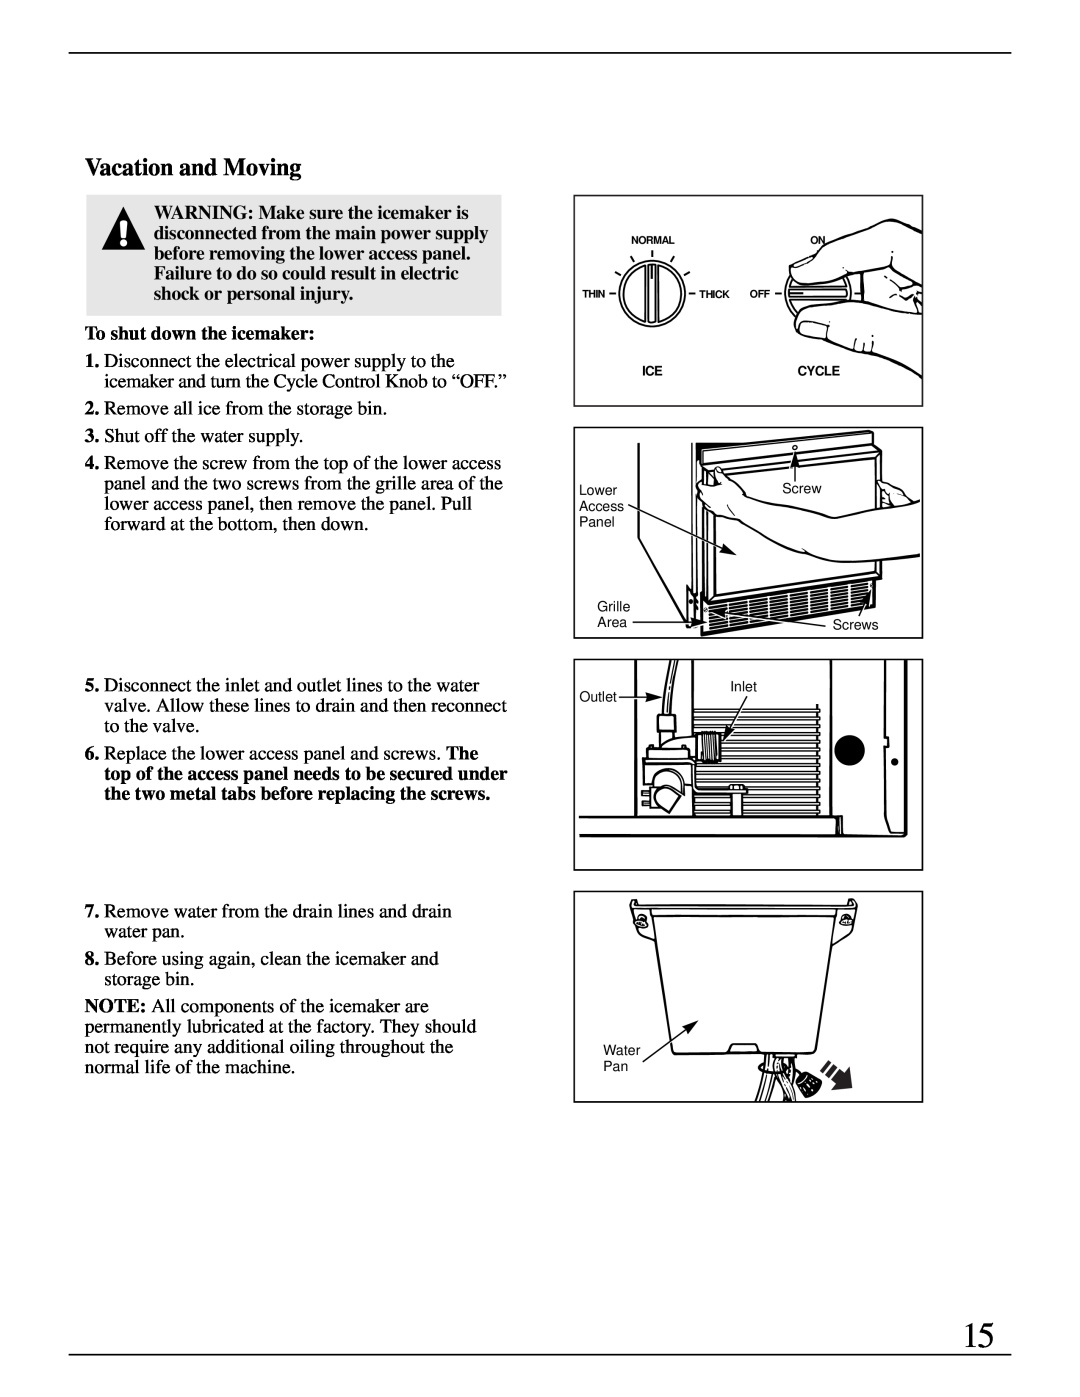 GE Monogram ZDIB50 installation instructions Vacation and Moving, To shut down the icemaker 